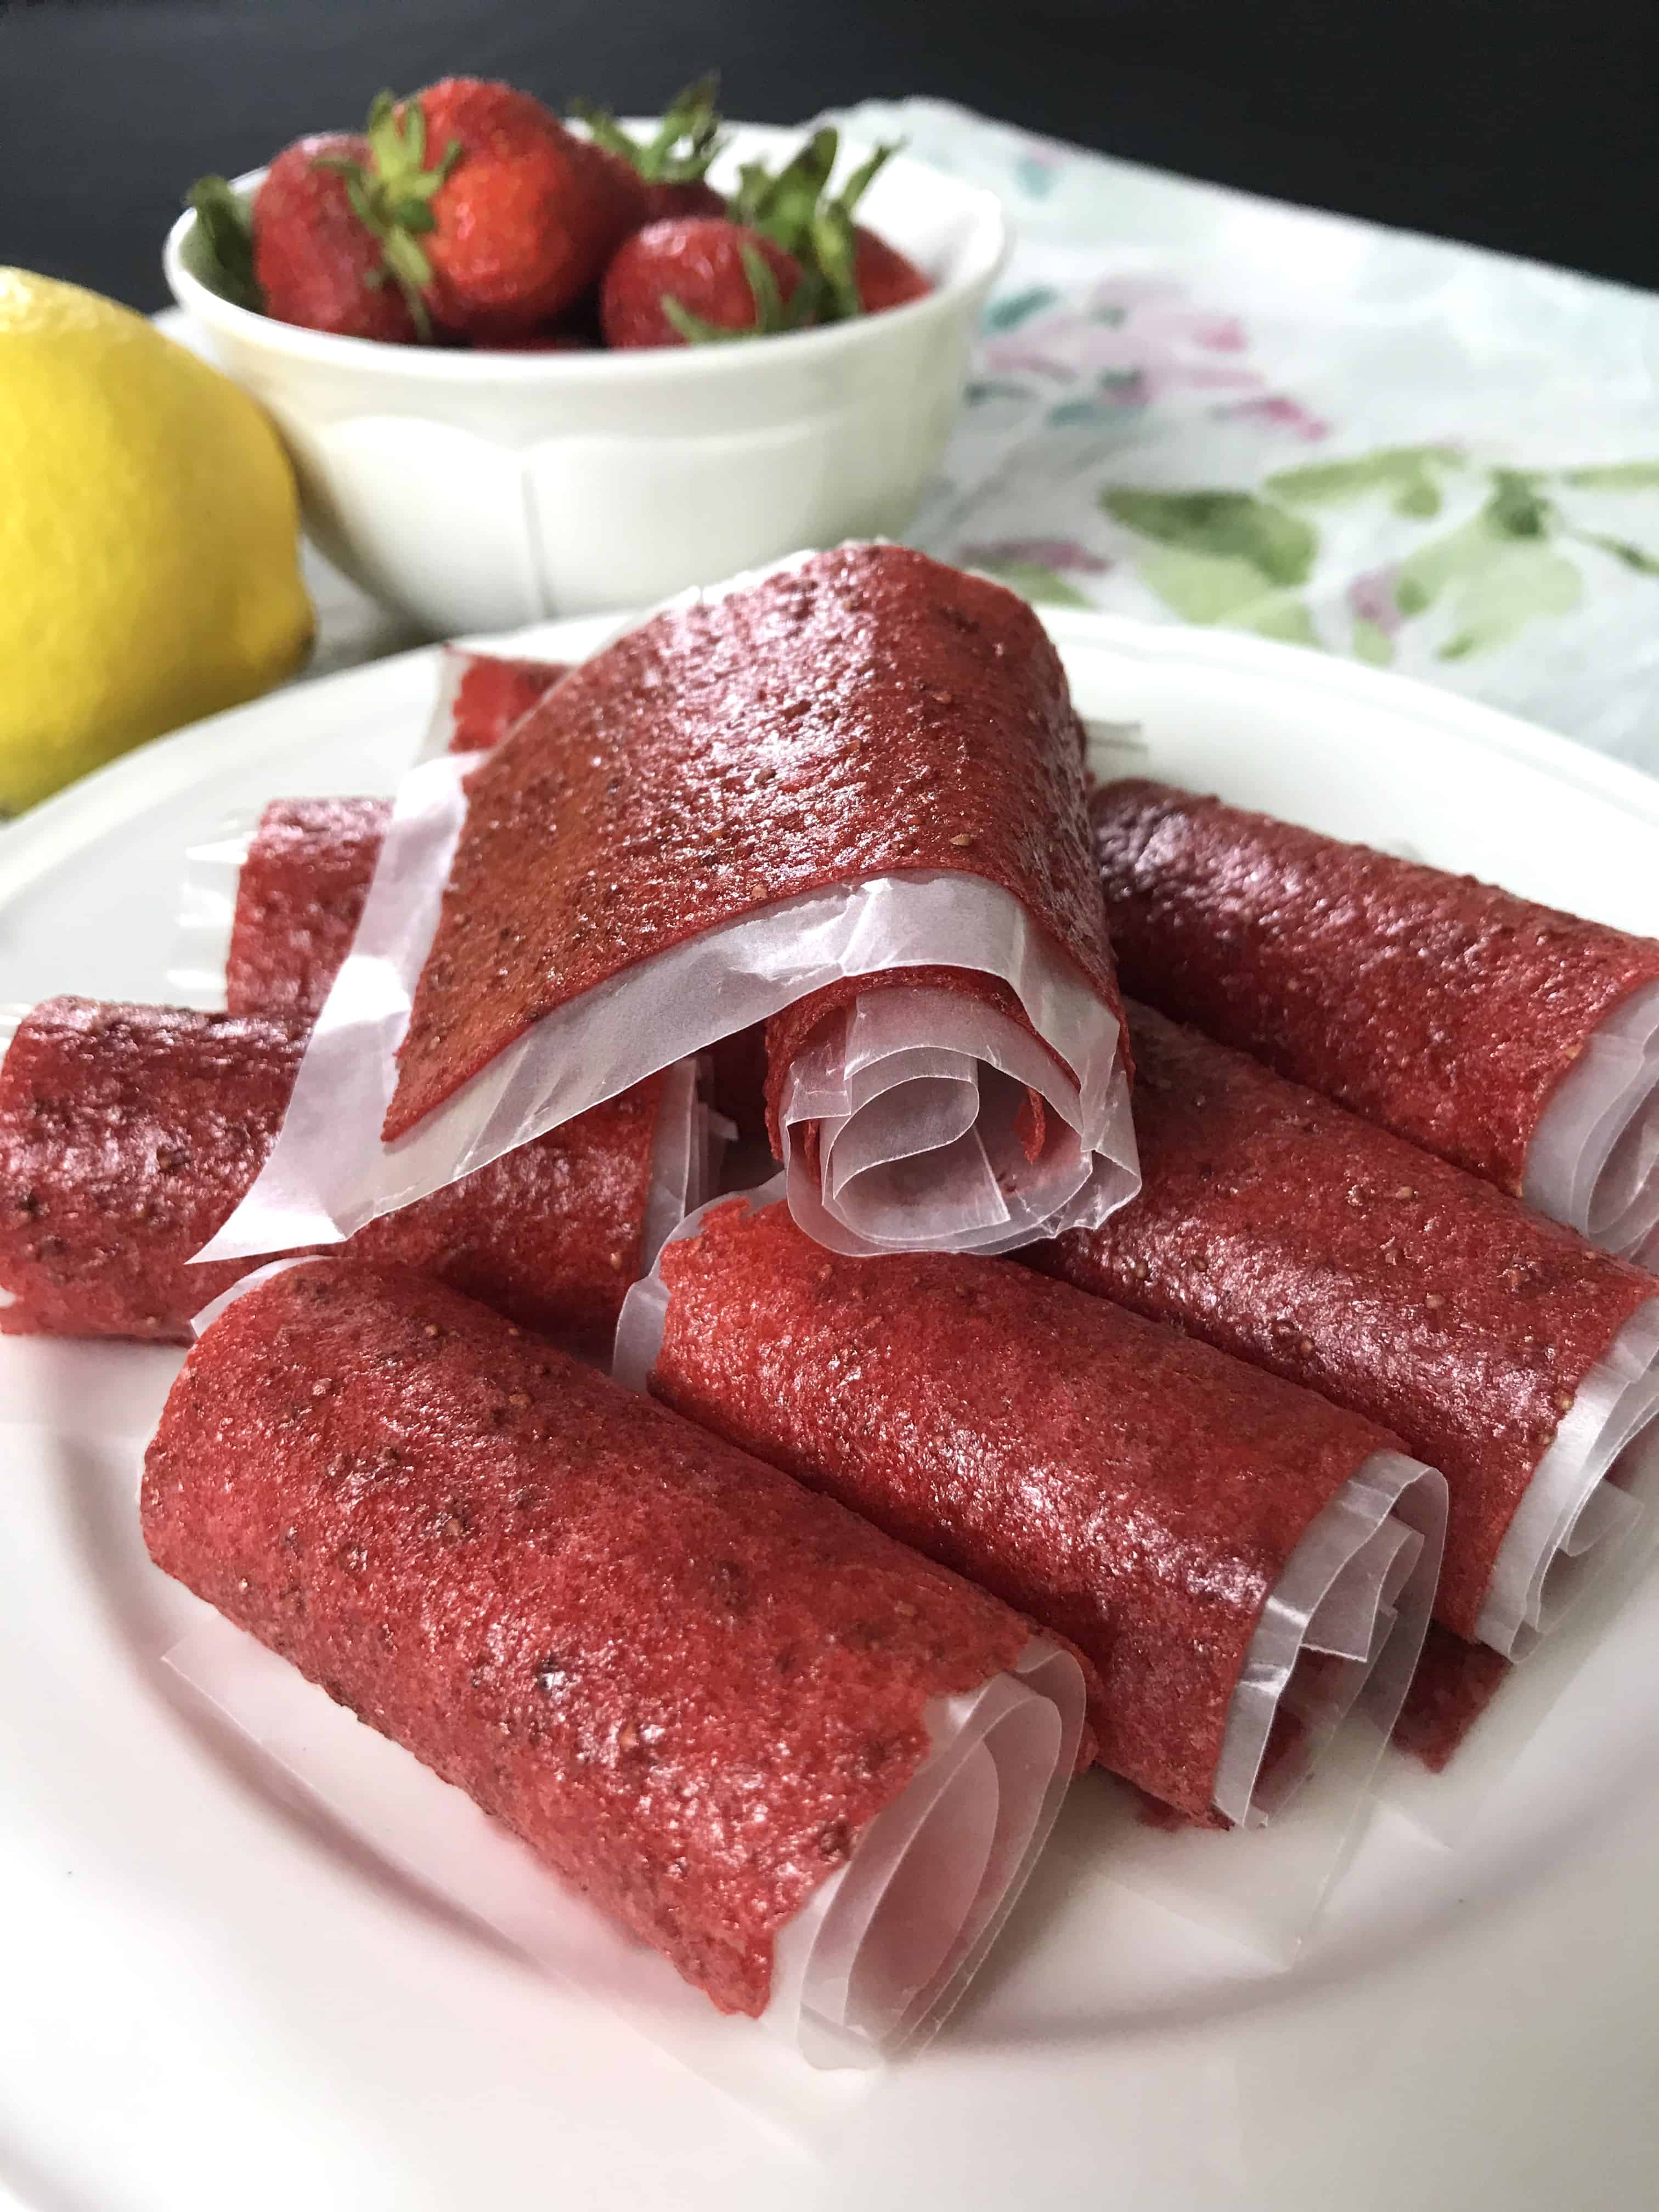 How to Make Homemade Fruit Leather